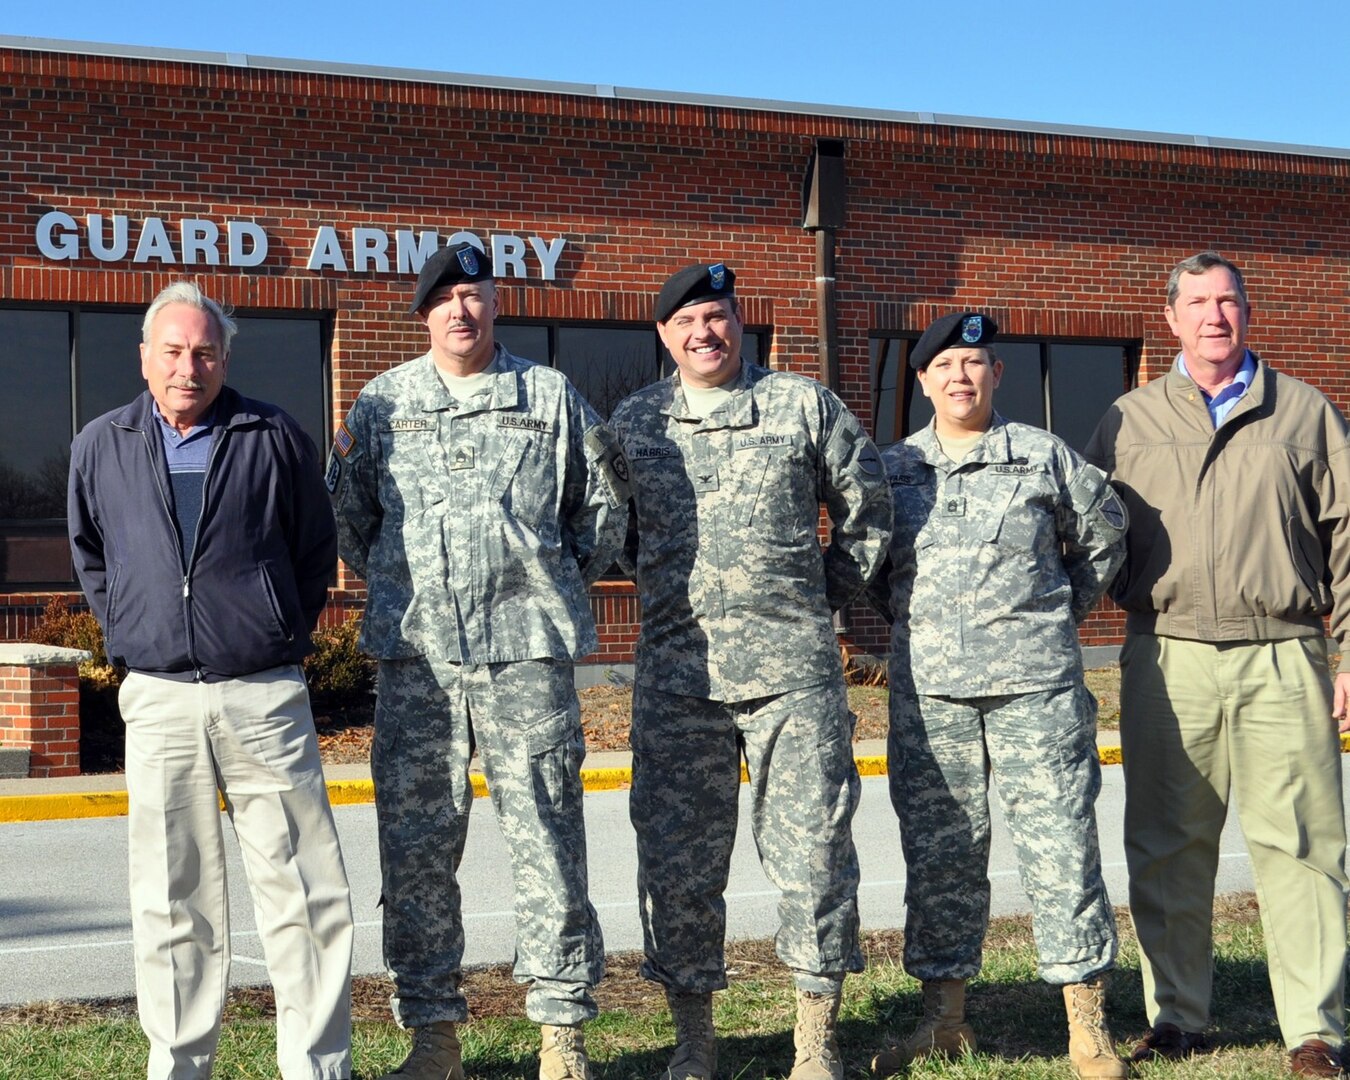 Richard Copas, Army Staff Sgt. Walter Carter Jr., Army Col. Charlie Harris, Army Sgt. 1st Class Debra Faris and N.A. Filiatreau headed up a security program that earned Kentucky nationwide recognition.